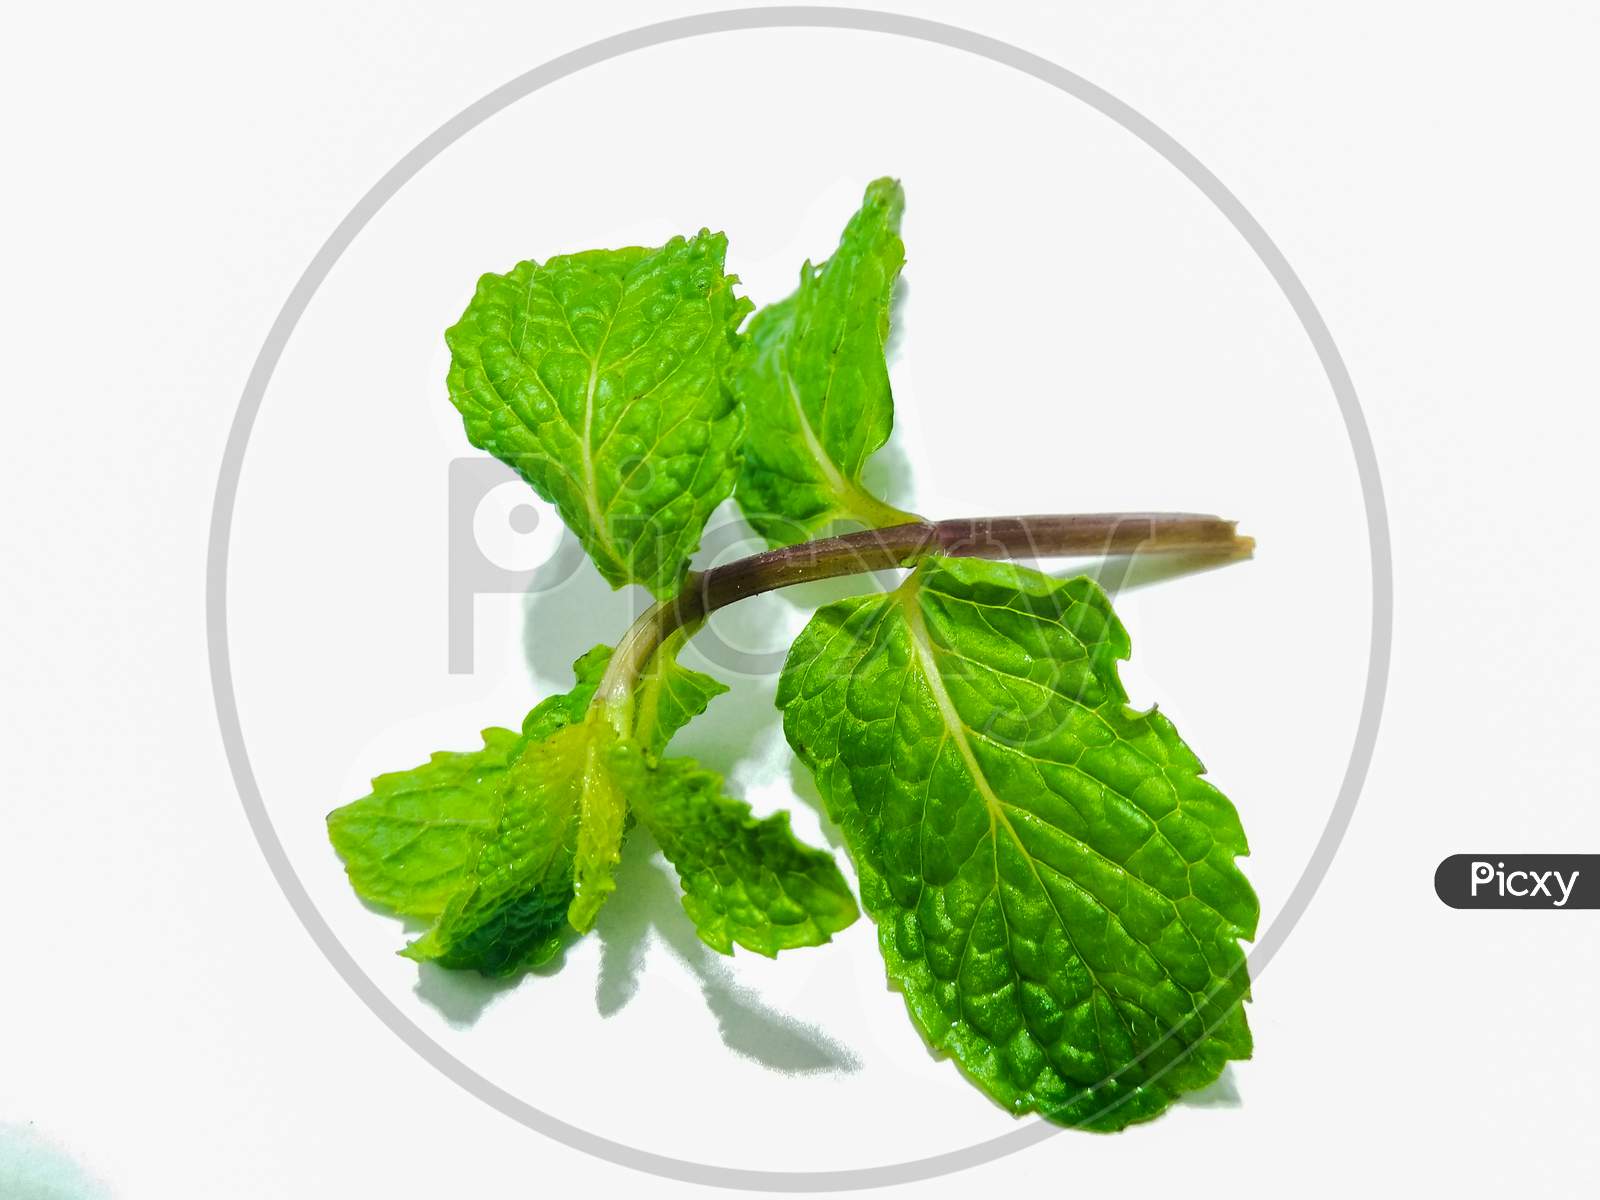 Green Mint Leafs Over an Isolated White Background